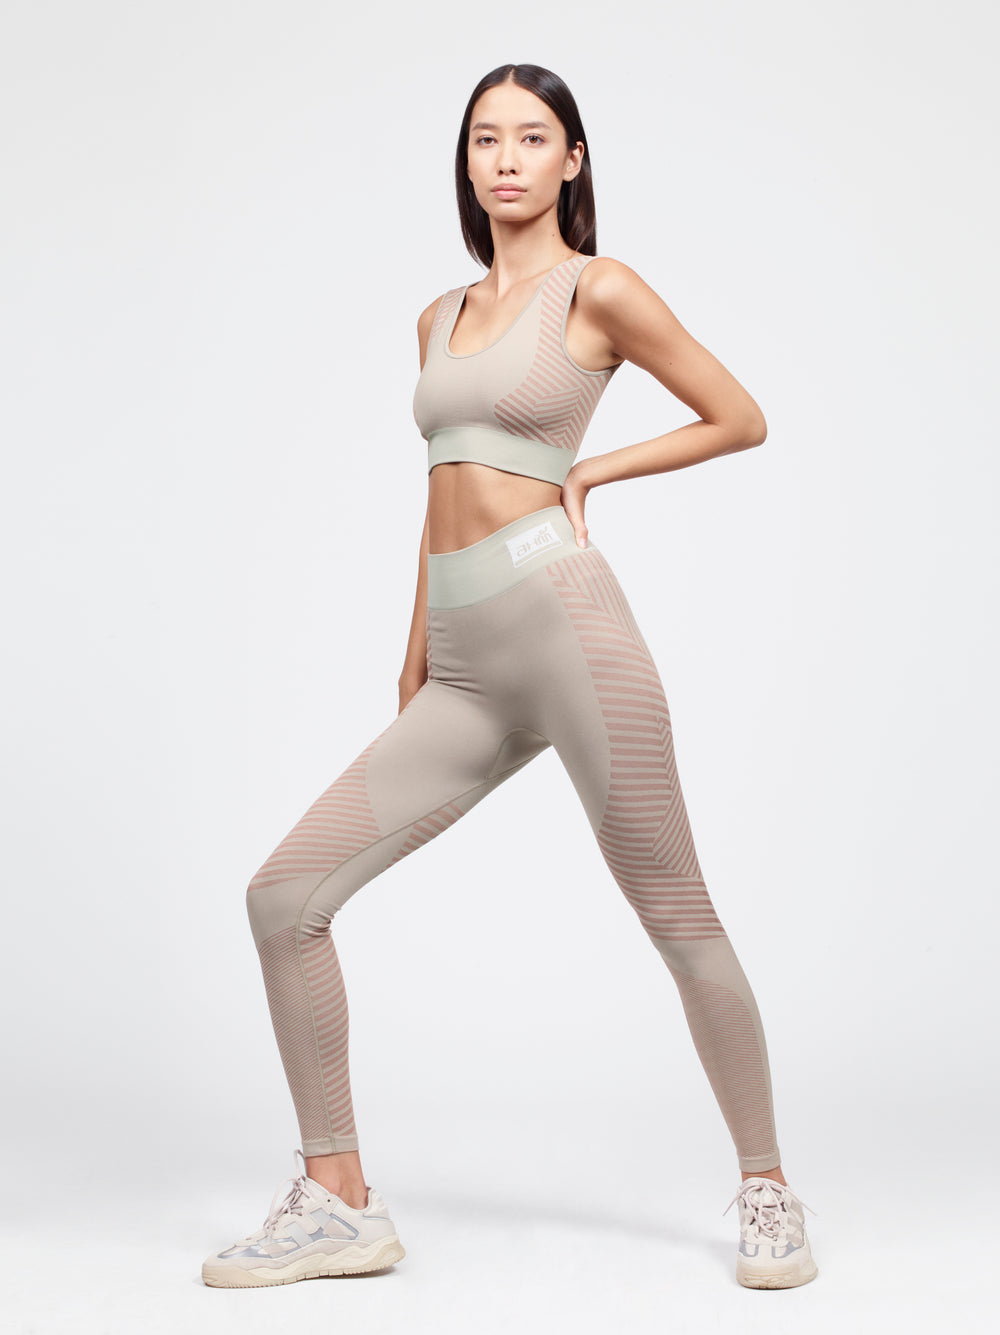 Scoop neck sport bra with compression legging set in tranquil taupe